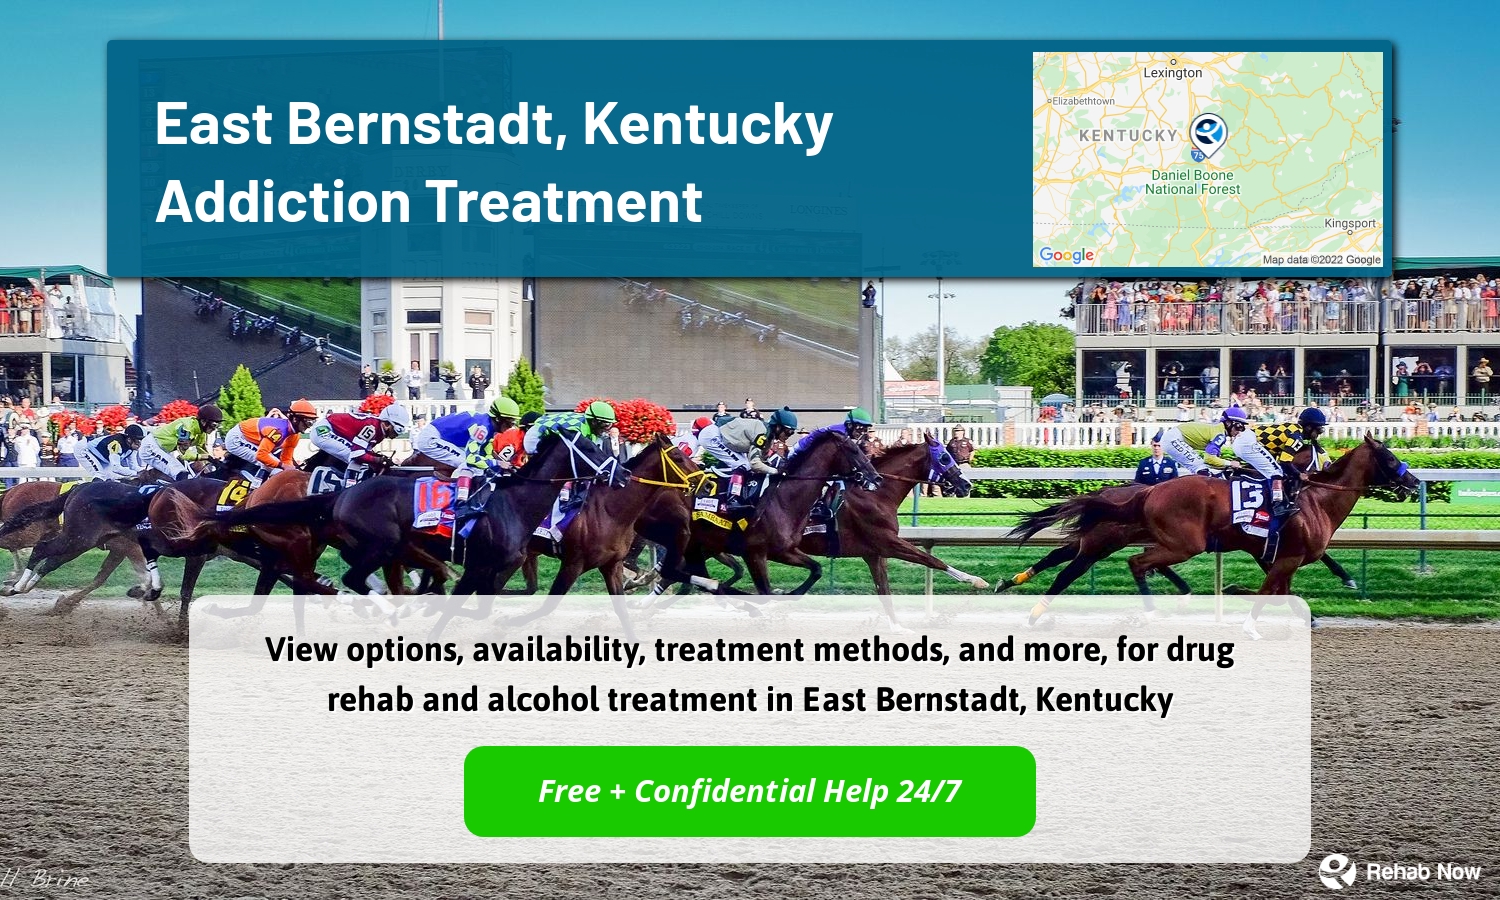 View options, availability, treatment methods, and more, for drug rehab and alcohol treatment in East Bernstadt, Kentucky